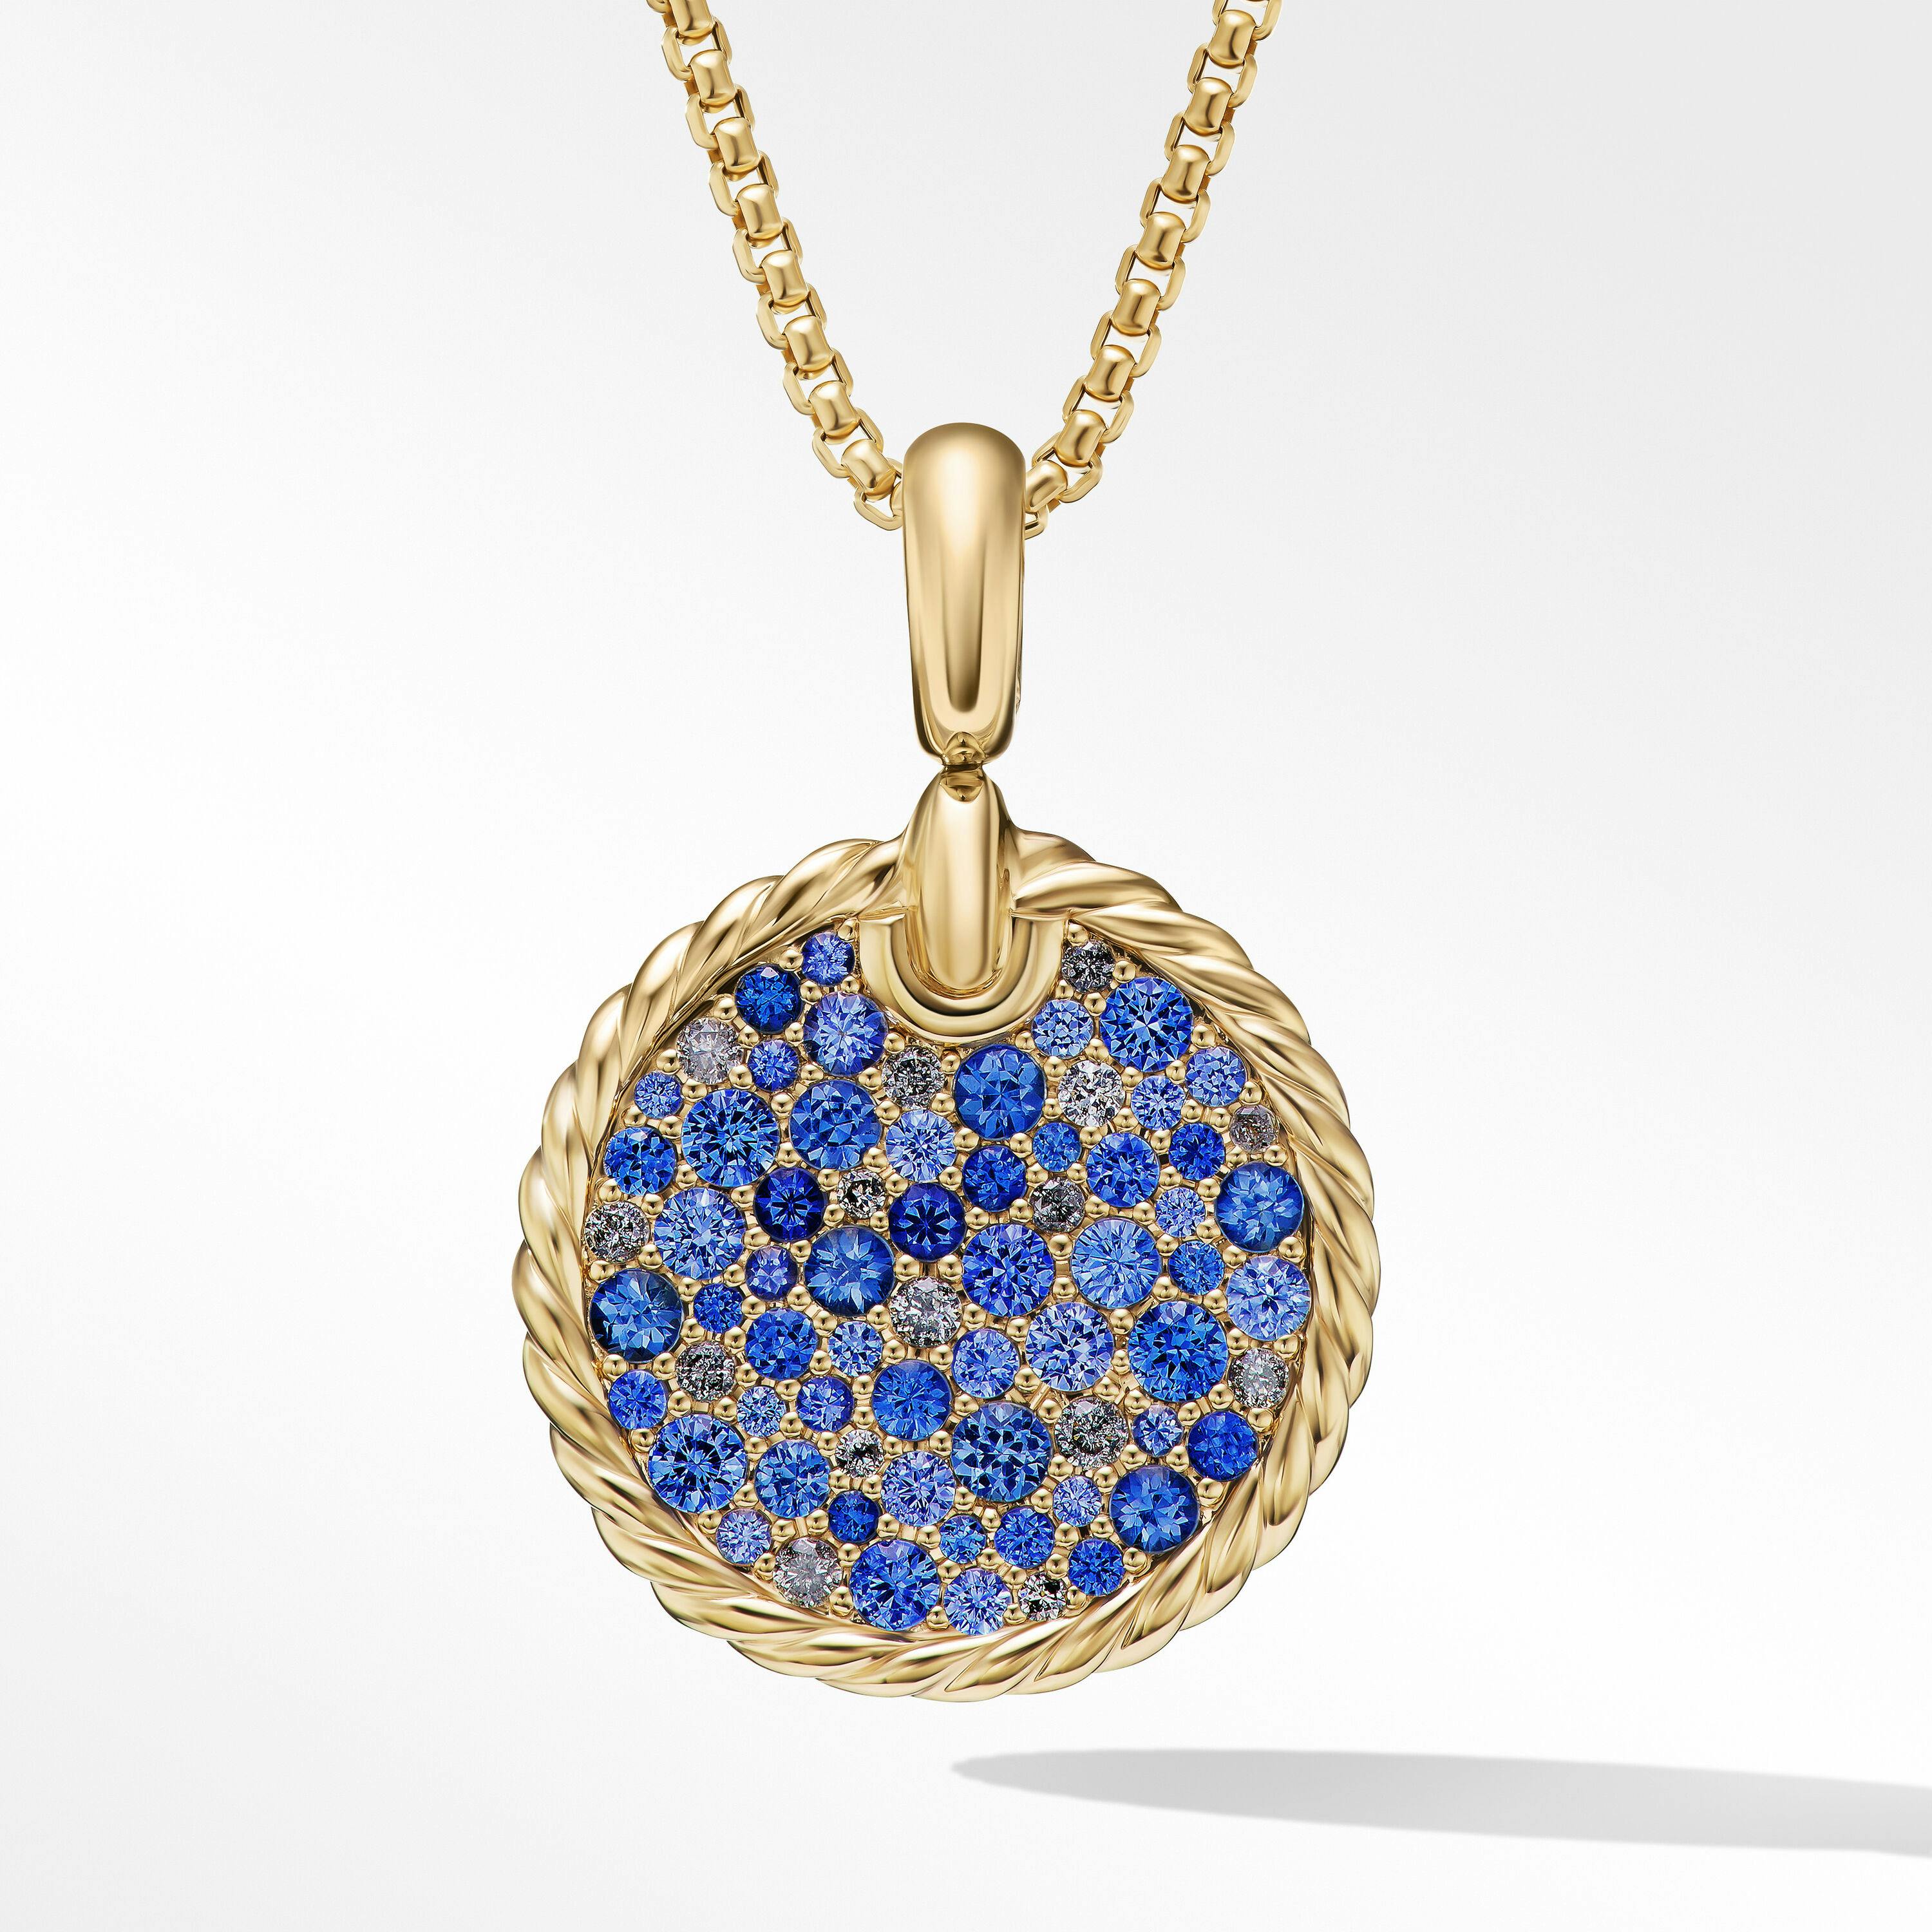 David Yurman DY Elements Water Pendant with Pave Blue Sapphires and Diamonds